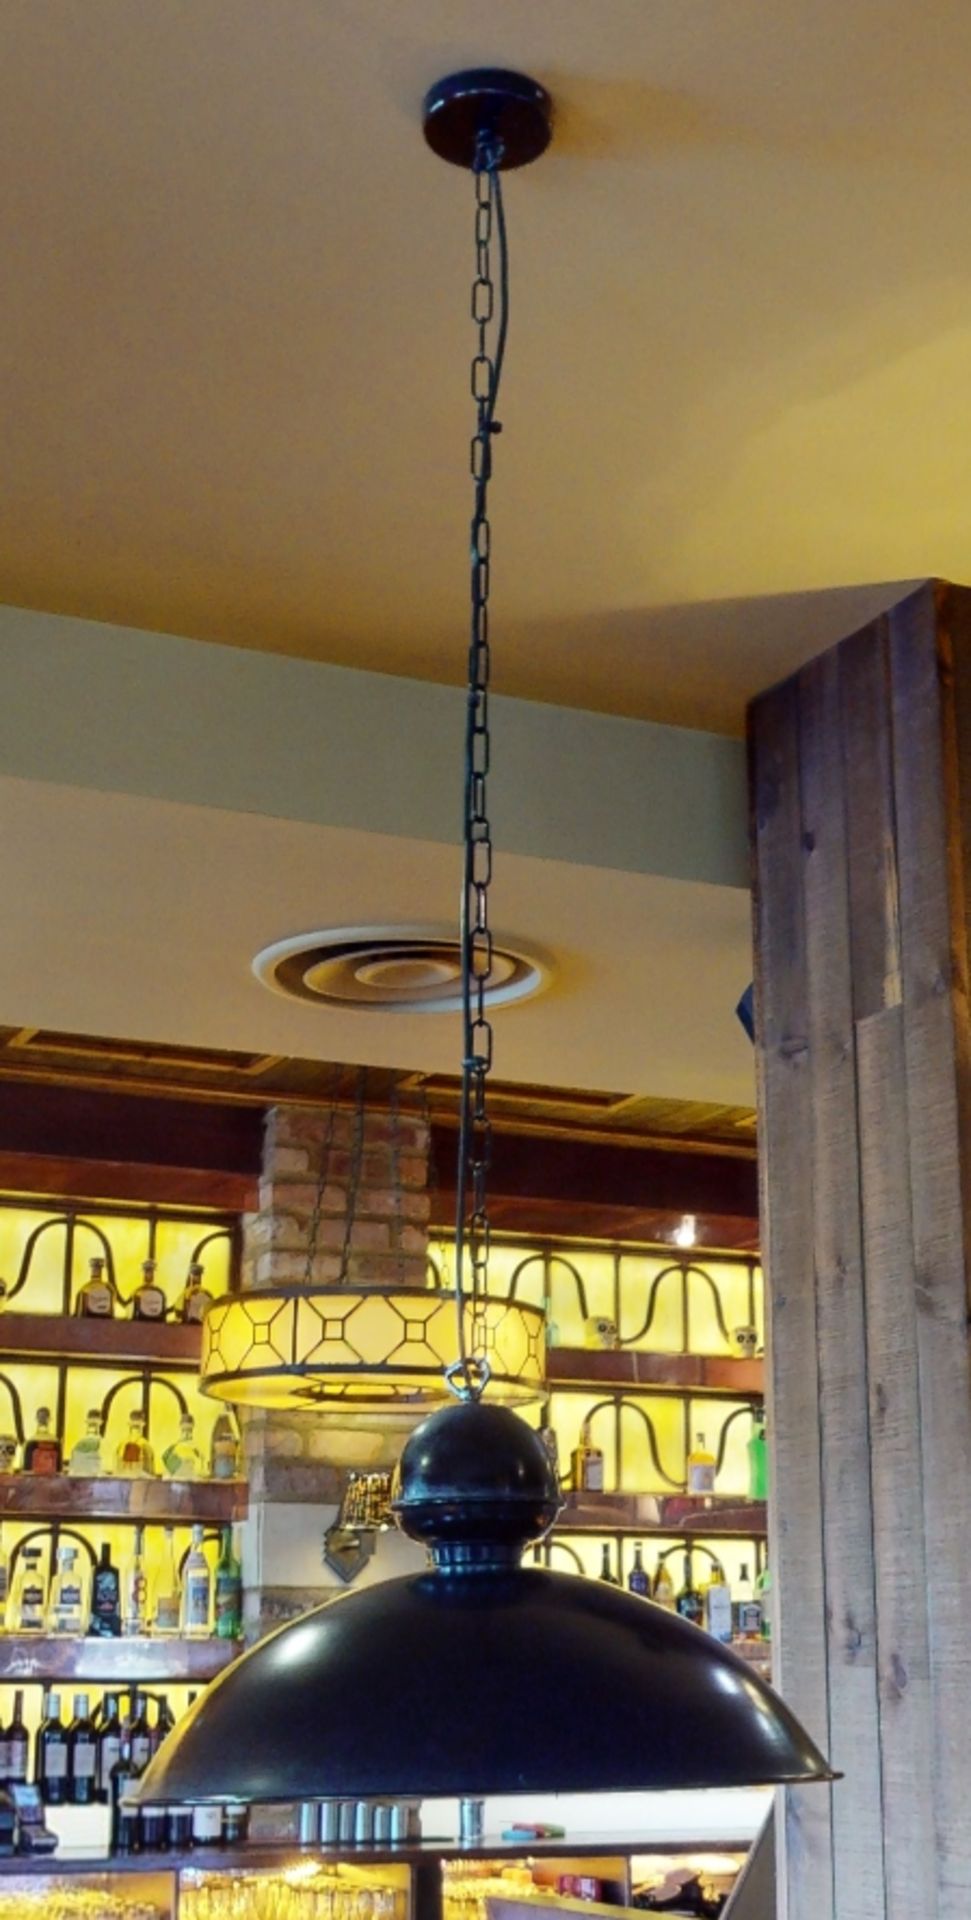 5 x Industrial Style Black Ceiling Pendant Dome Lights - Black Finish With Coloured Inner - Long